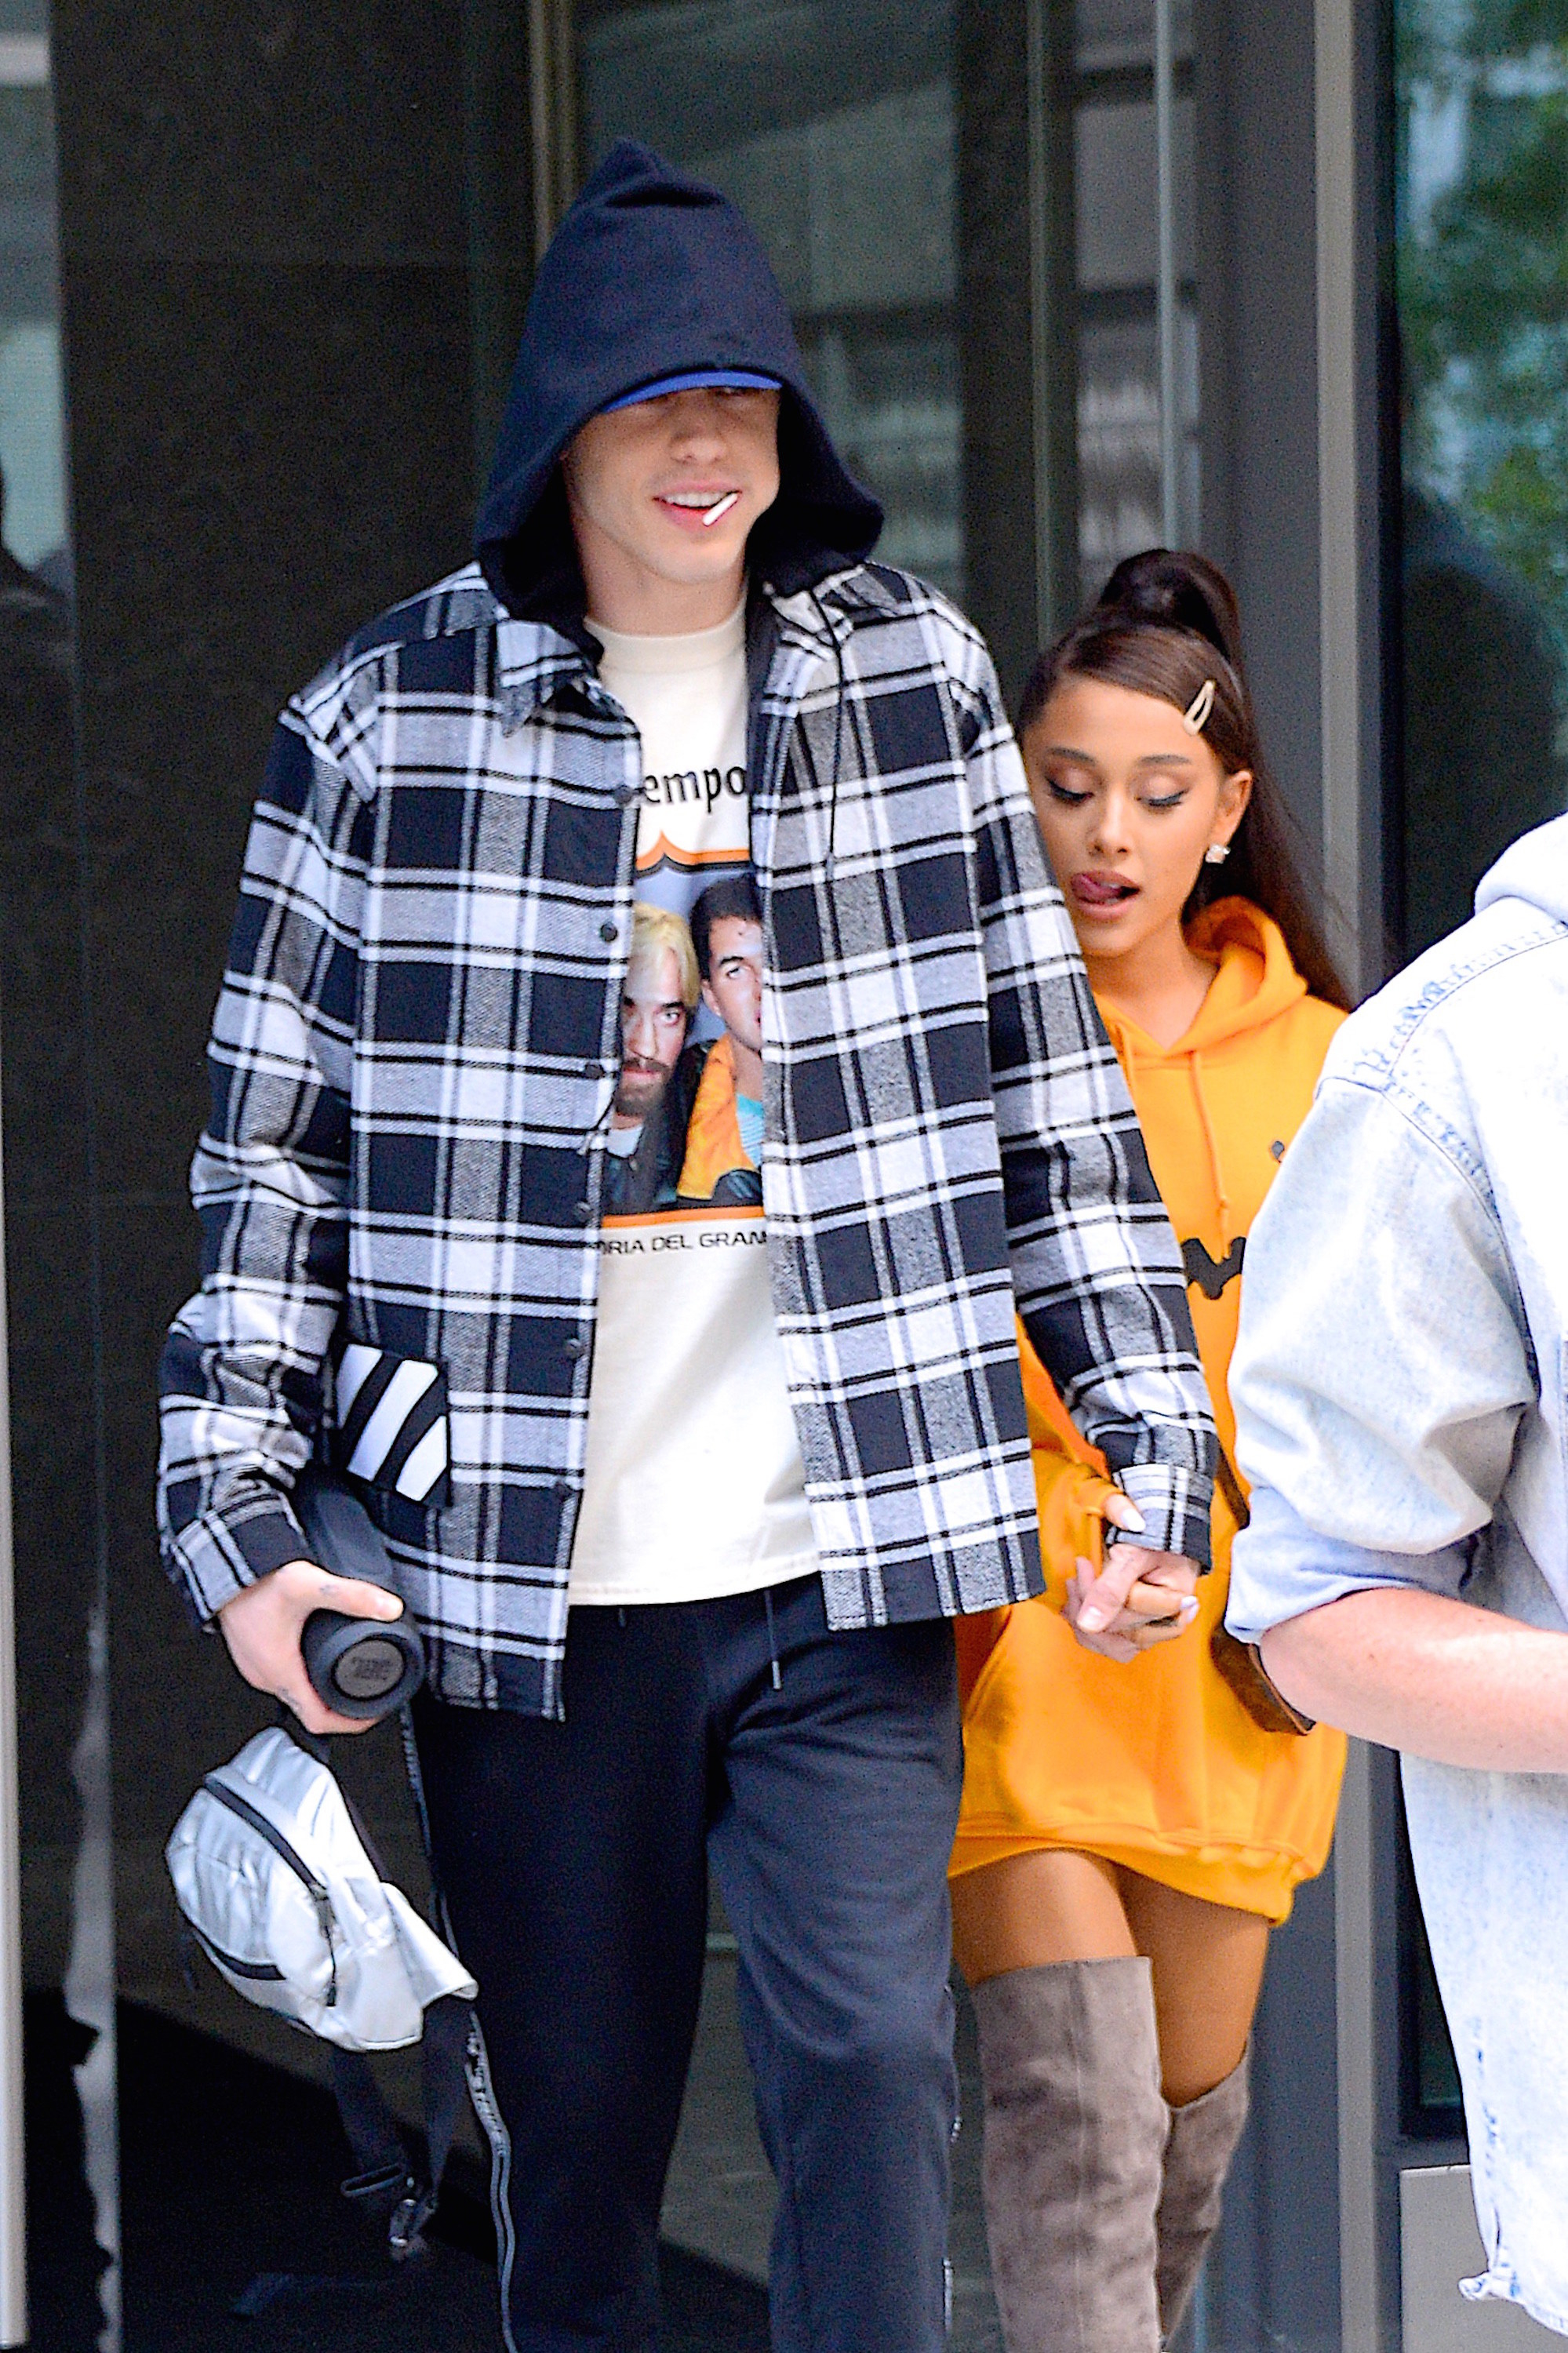 The former couple walking out of a building together while holding hands